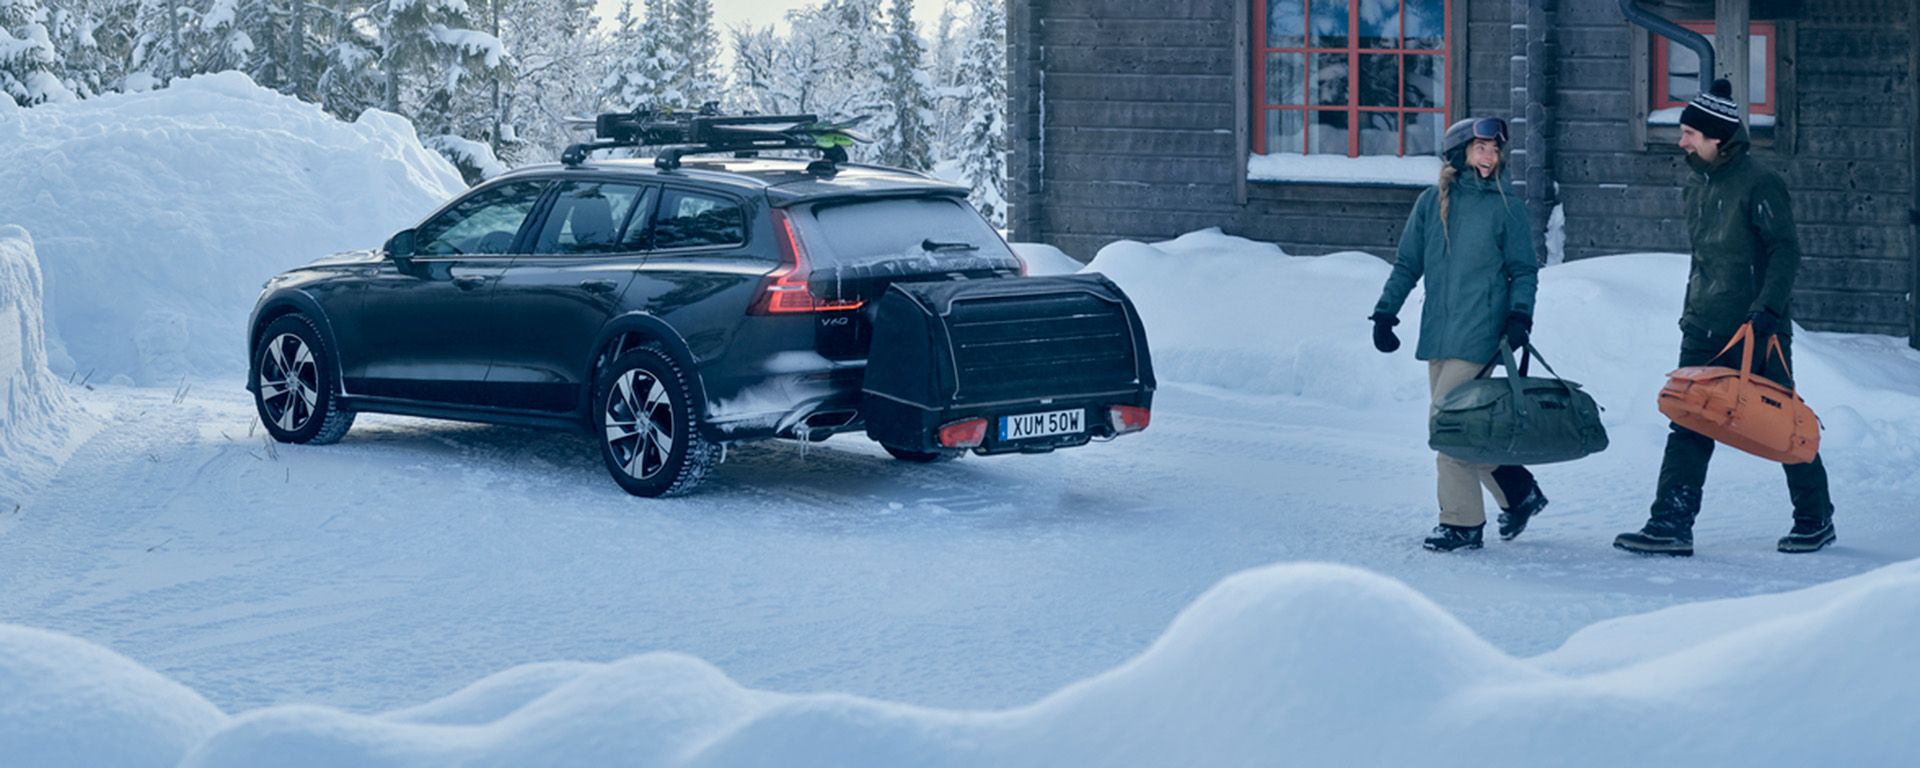 A car with a Thule Onto rear cargo carrier is parked in the snow by a cottage with a ski rack.